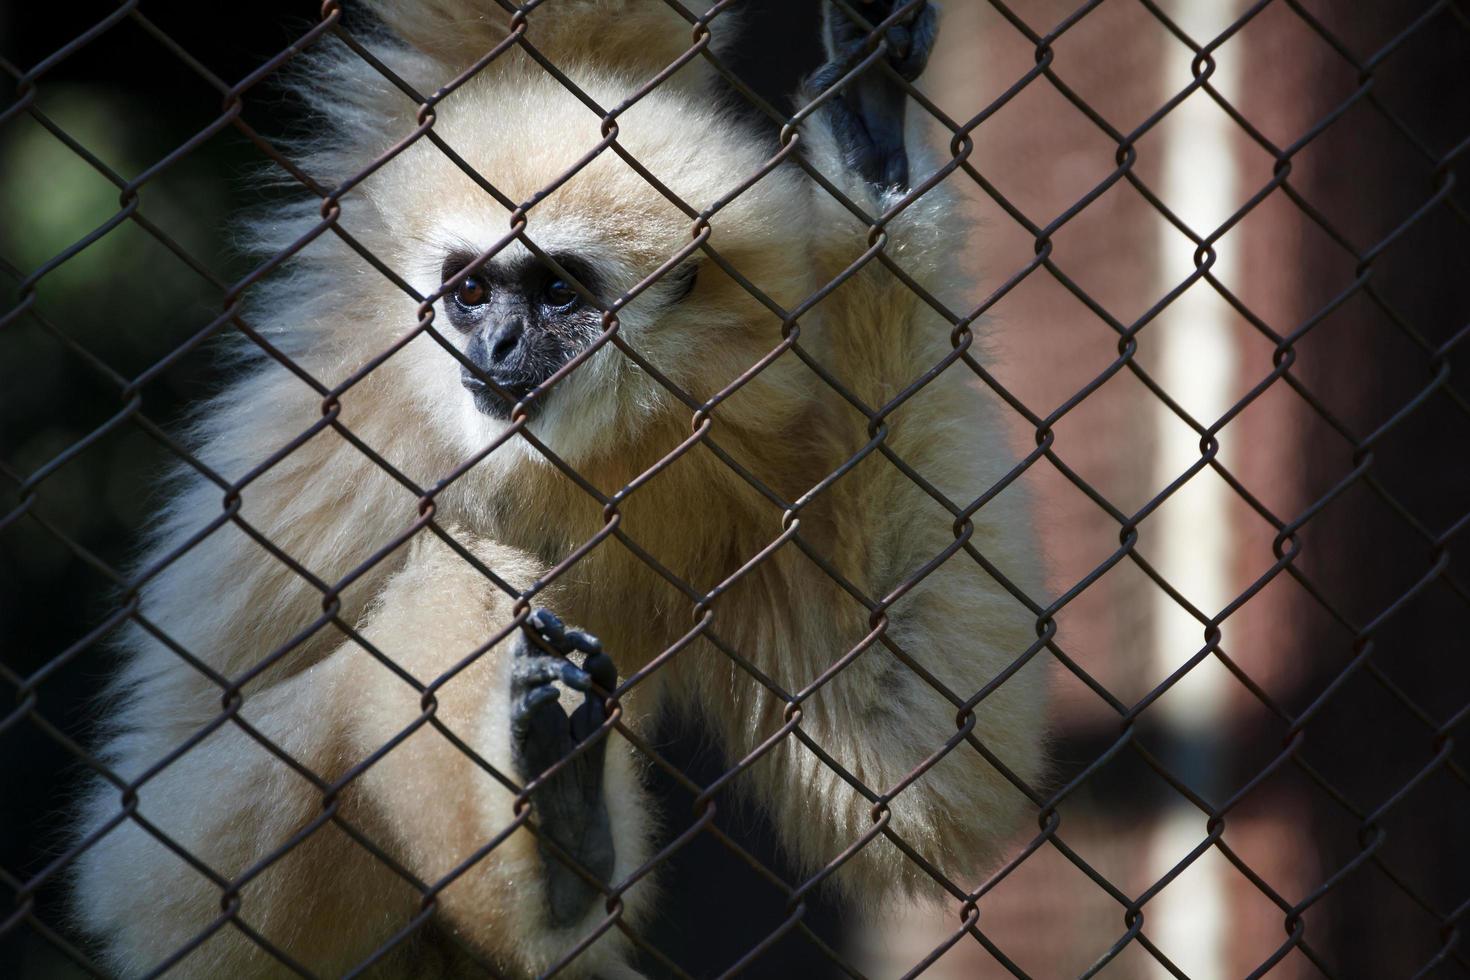 unhappy expression gibbon in cage photo